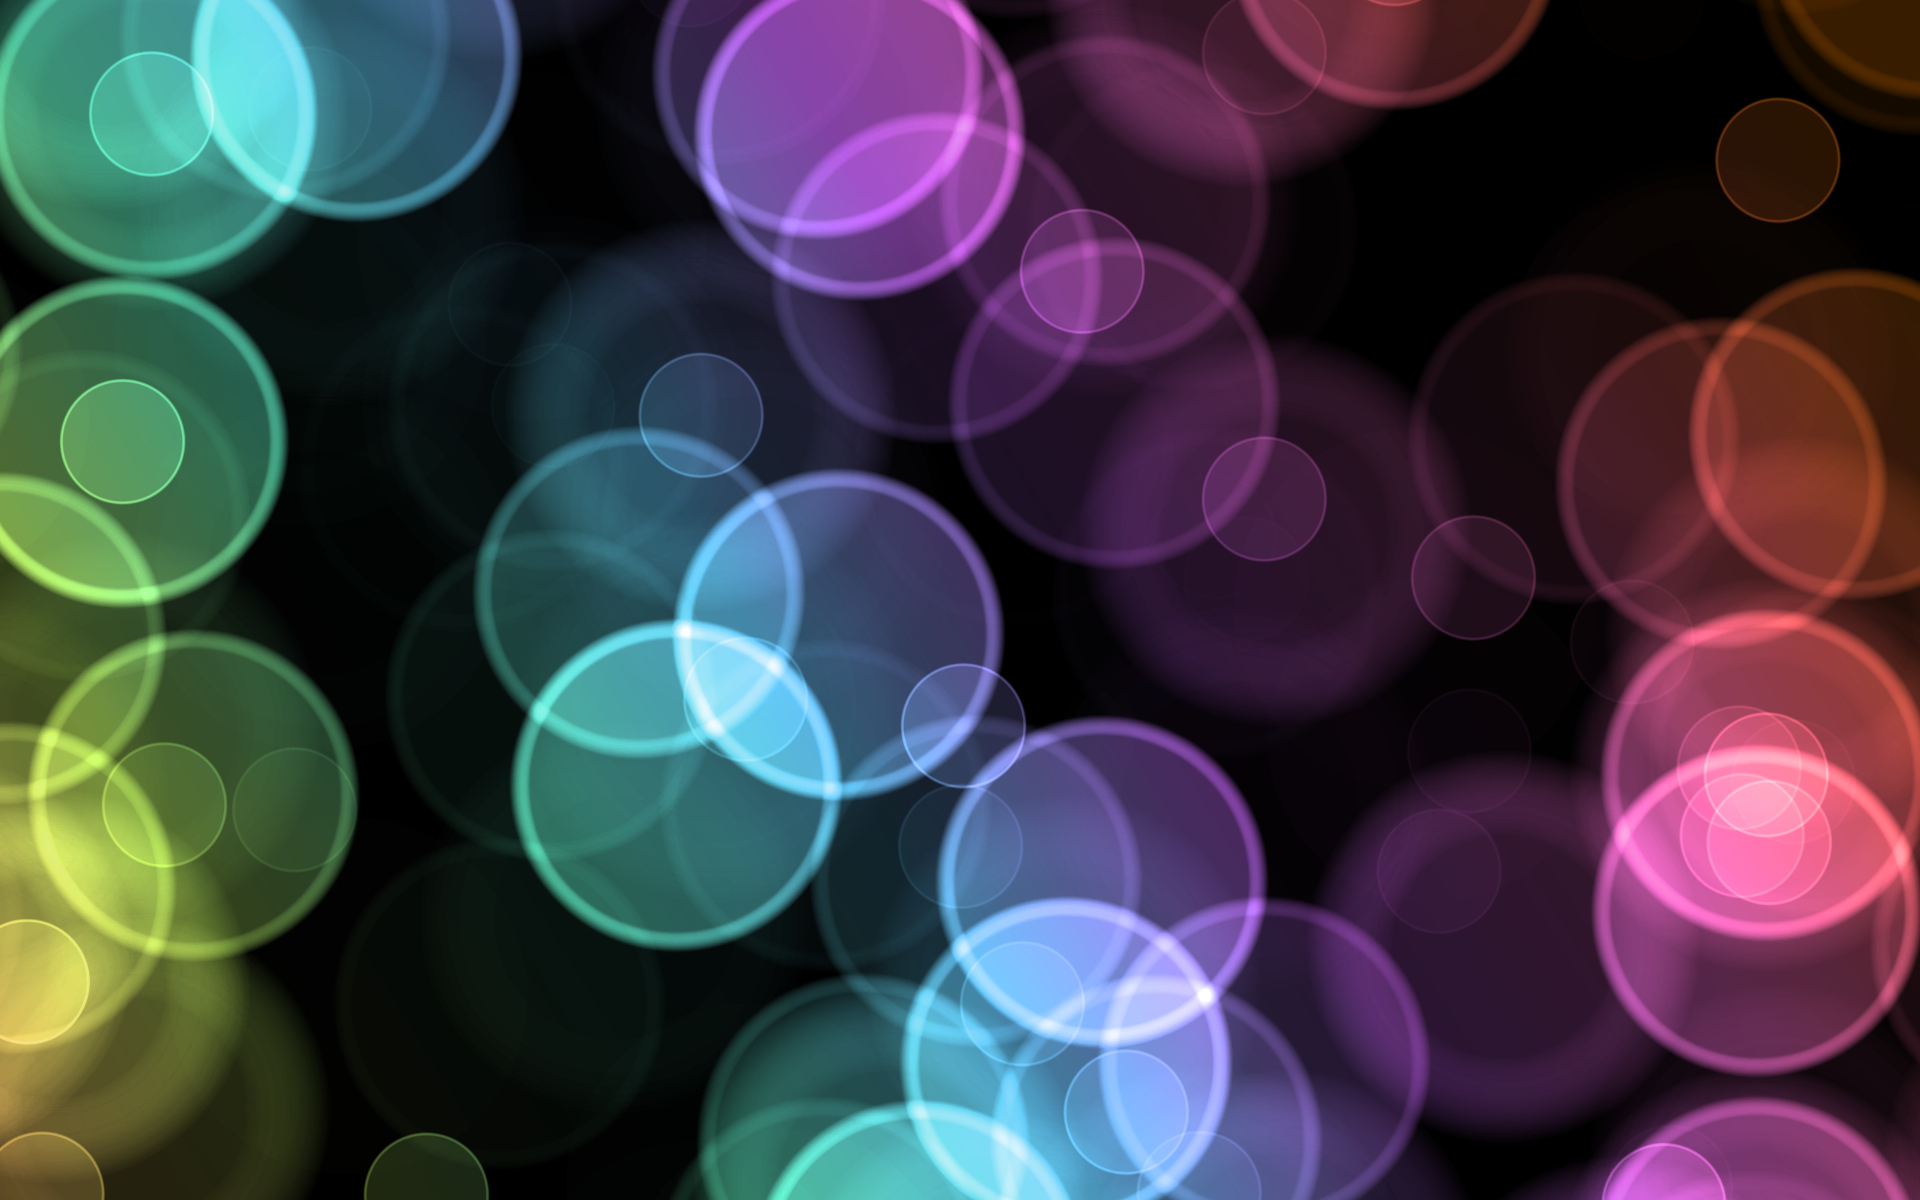 Color Bubbles wallpaper high resolution HD Quality